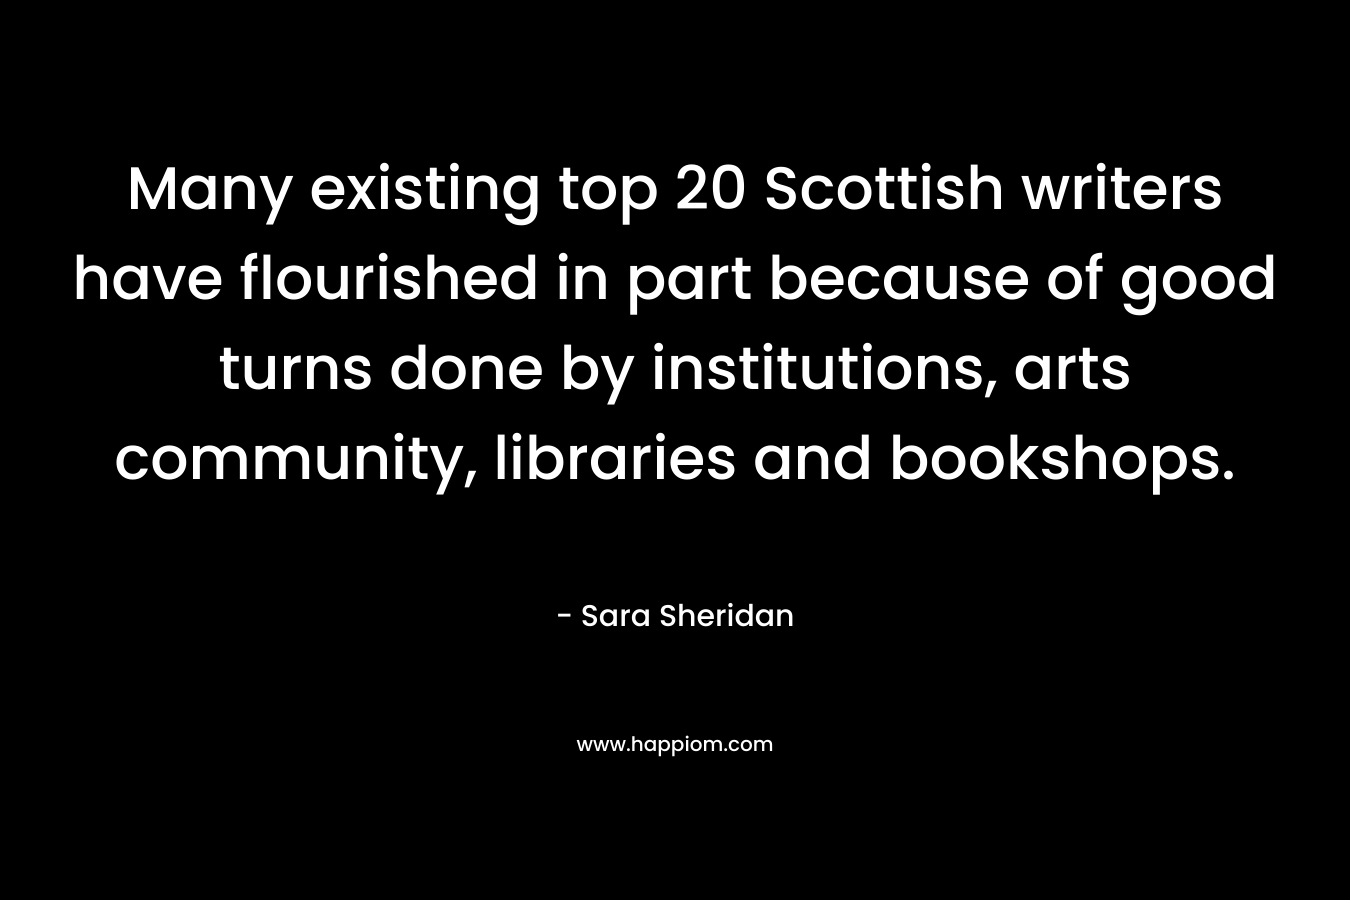 Many existing top 20 Scottish writers have flourished in part because of good turns done by institutions, arts community, libraries and bookshops. – Sara Sheridan